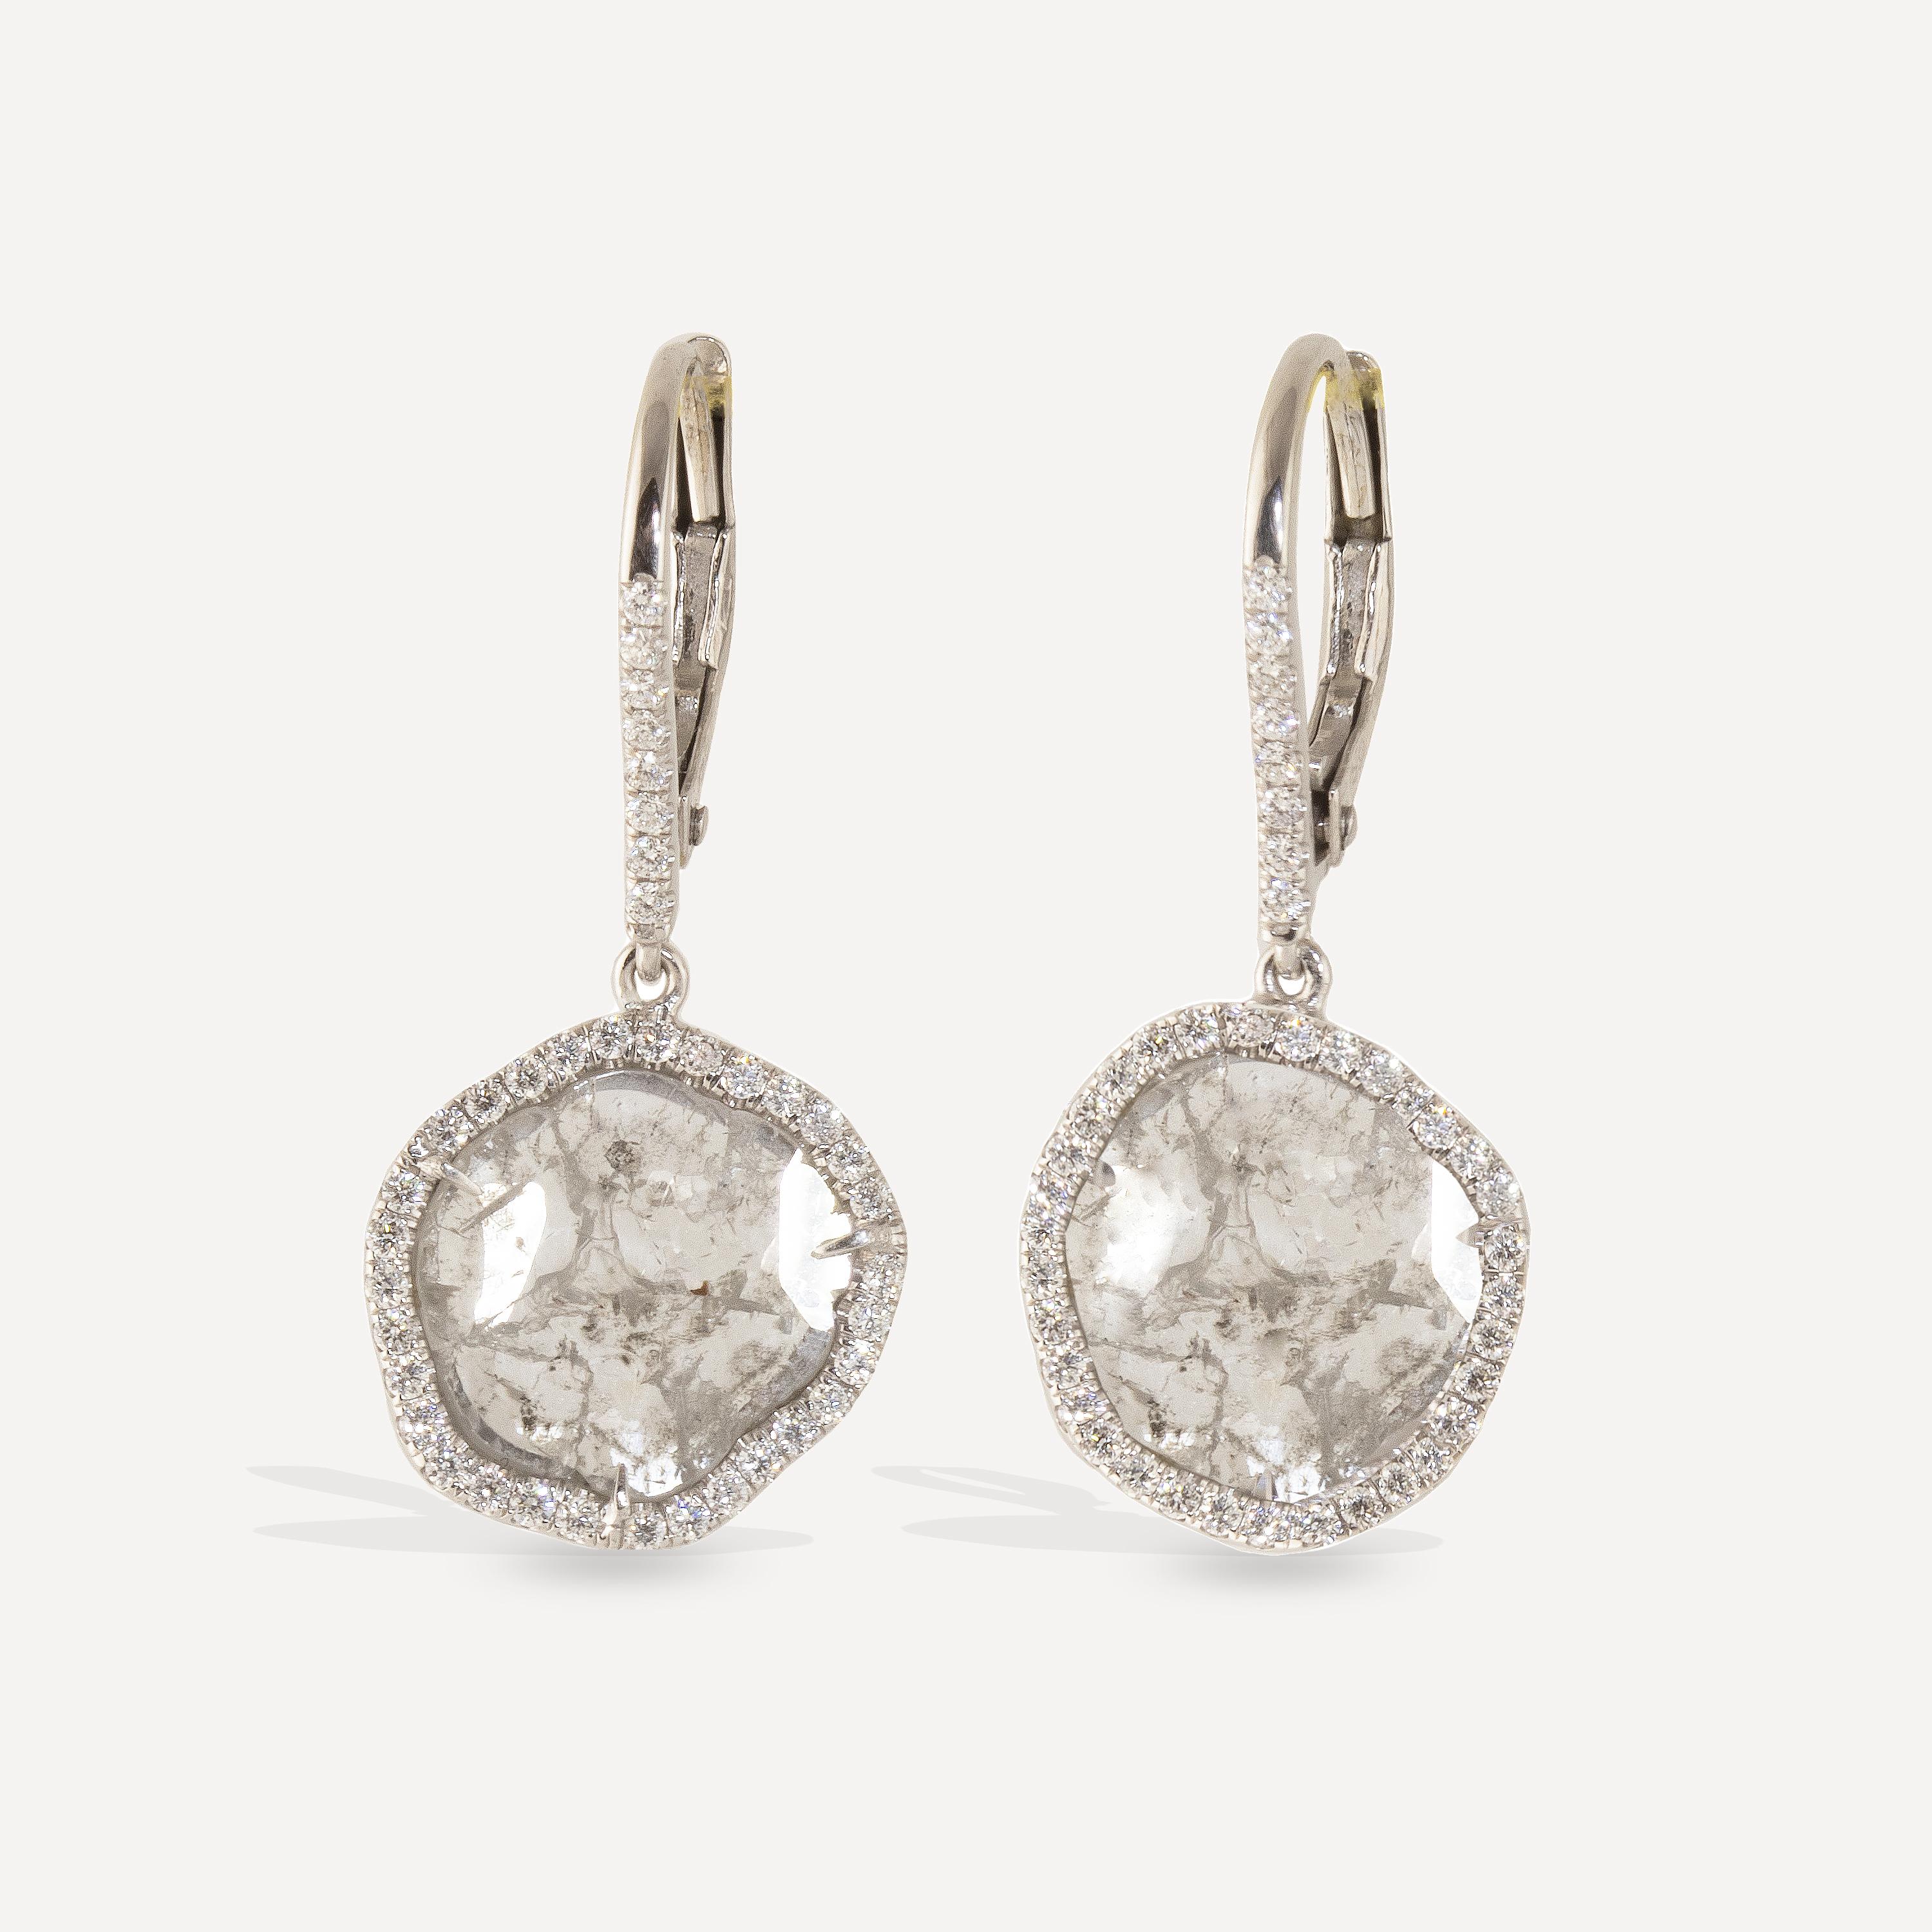 Exquisite 3.4 carat diamond slices earrings featuring a halo of .95 carats of Brilliant Diamond Pave. Set in 18k white gold with lever backs, these spectacular earrings were made by one of our master craftsman entirely by hand, using ethically